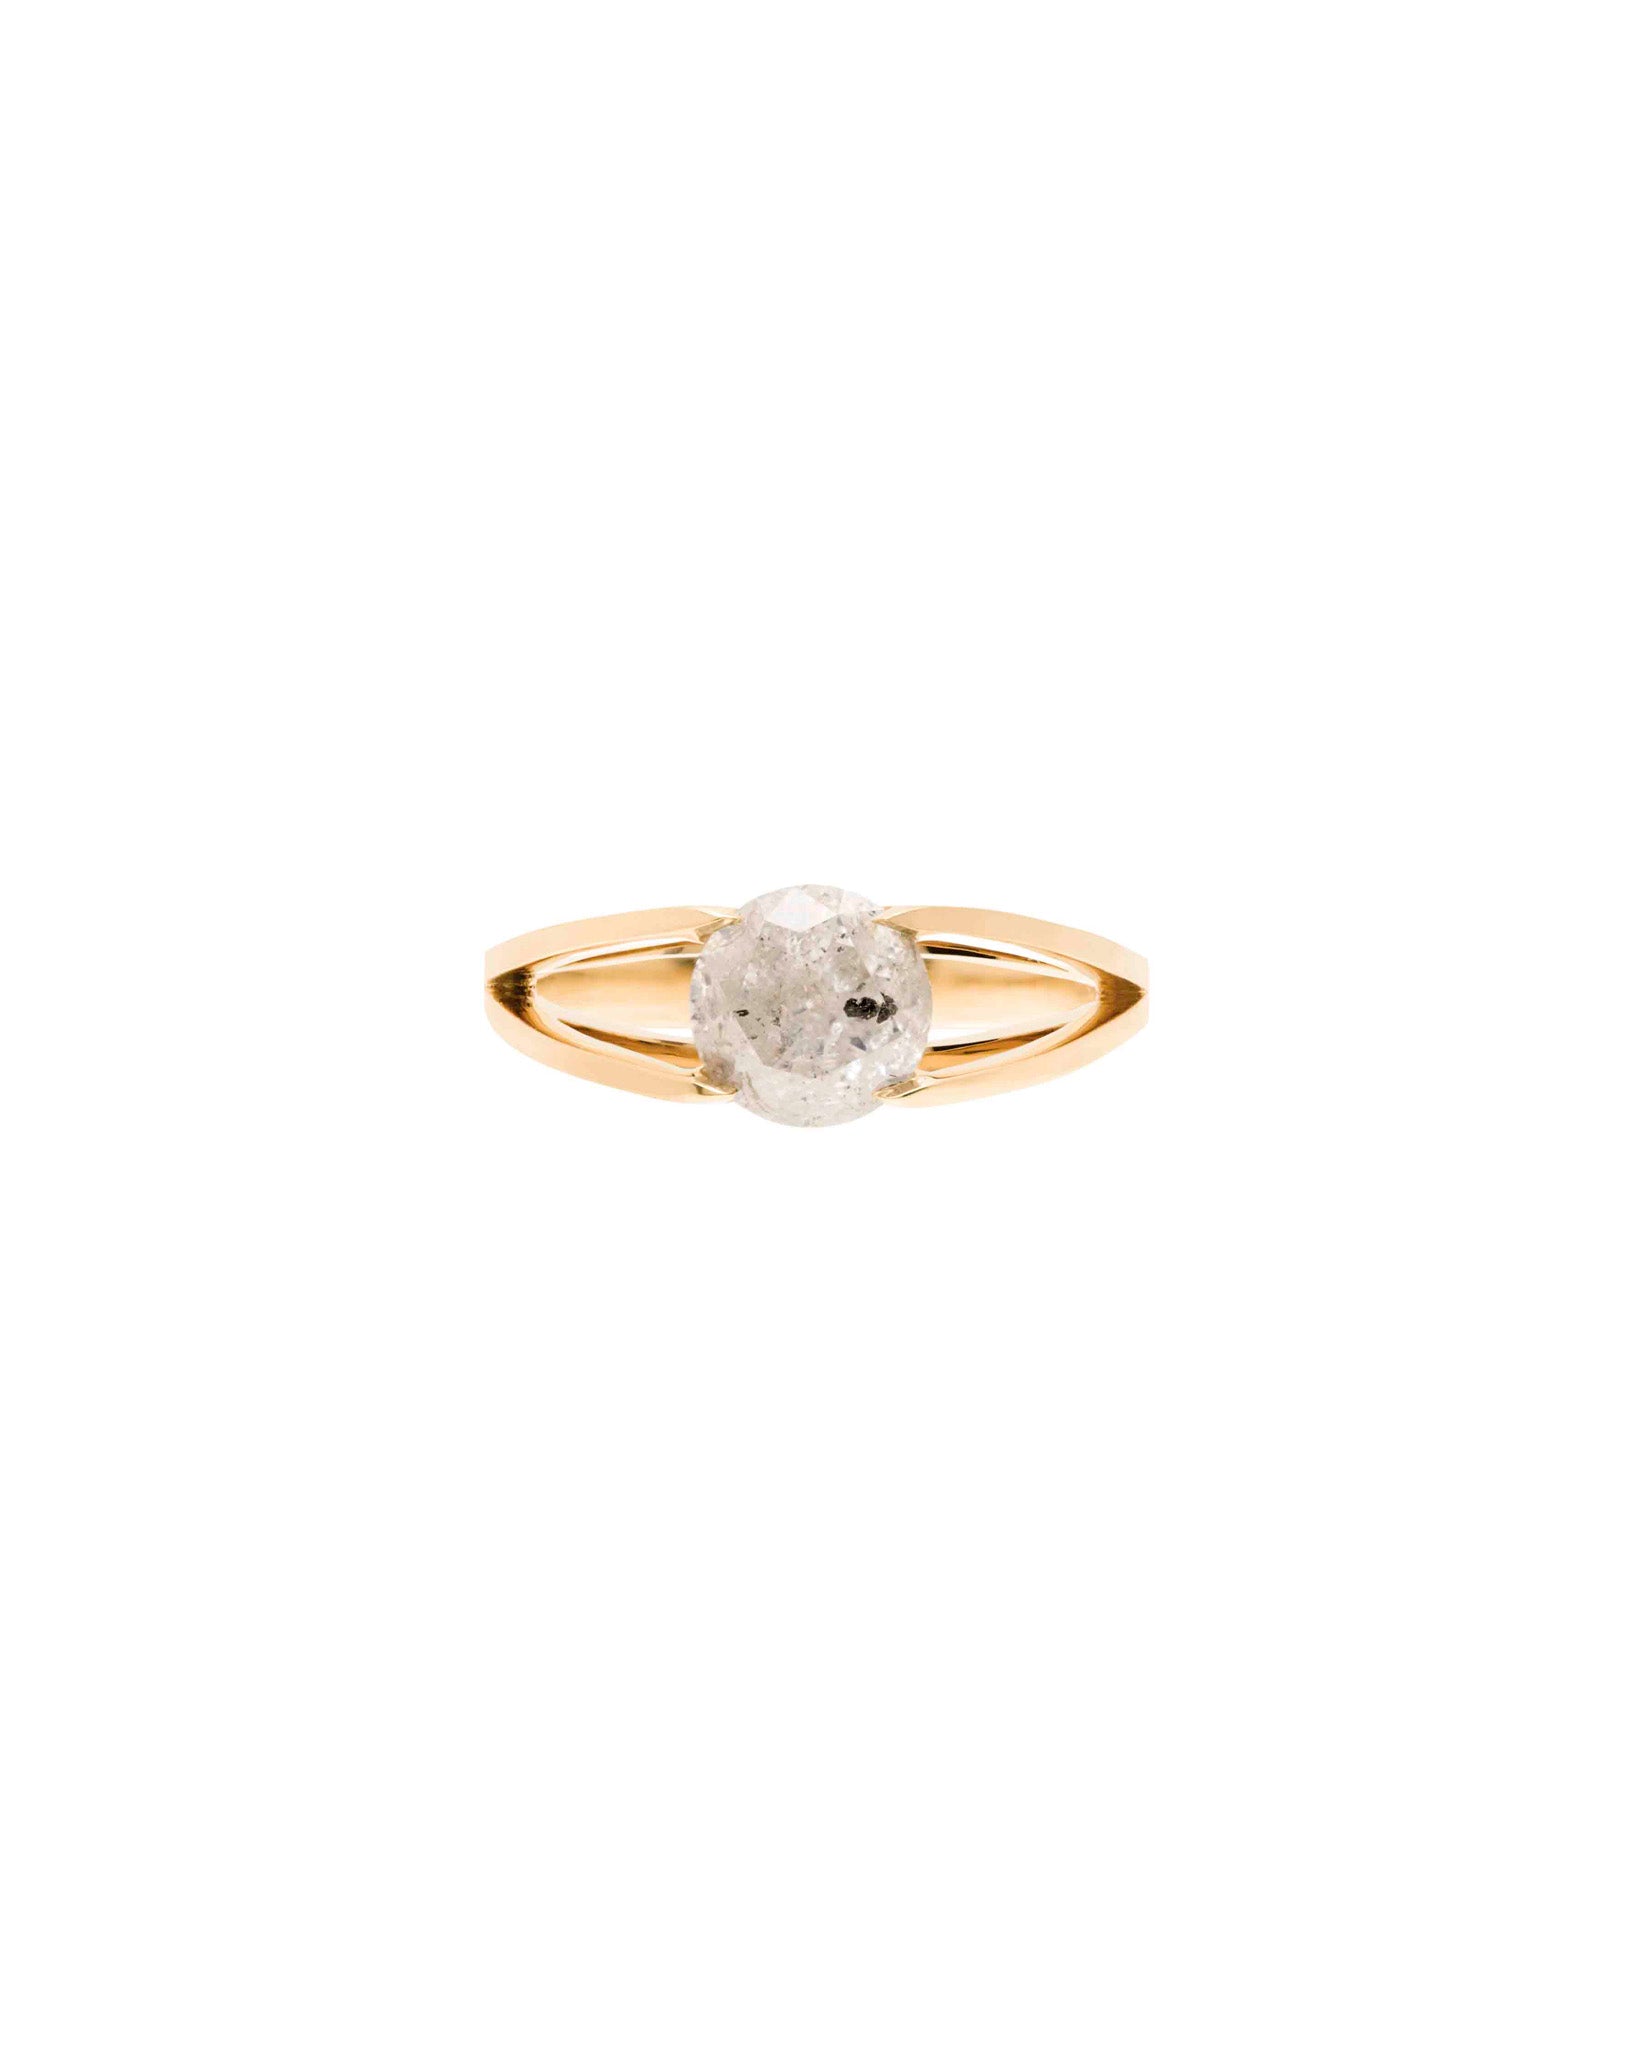 A gold band with a split shank that holds an icy diamond with some black specks